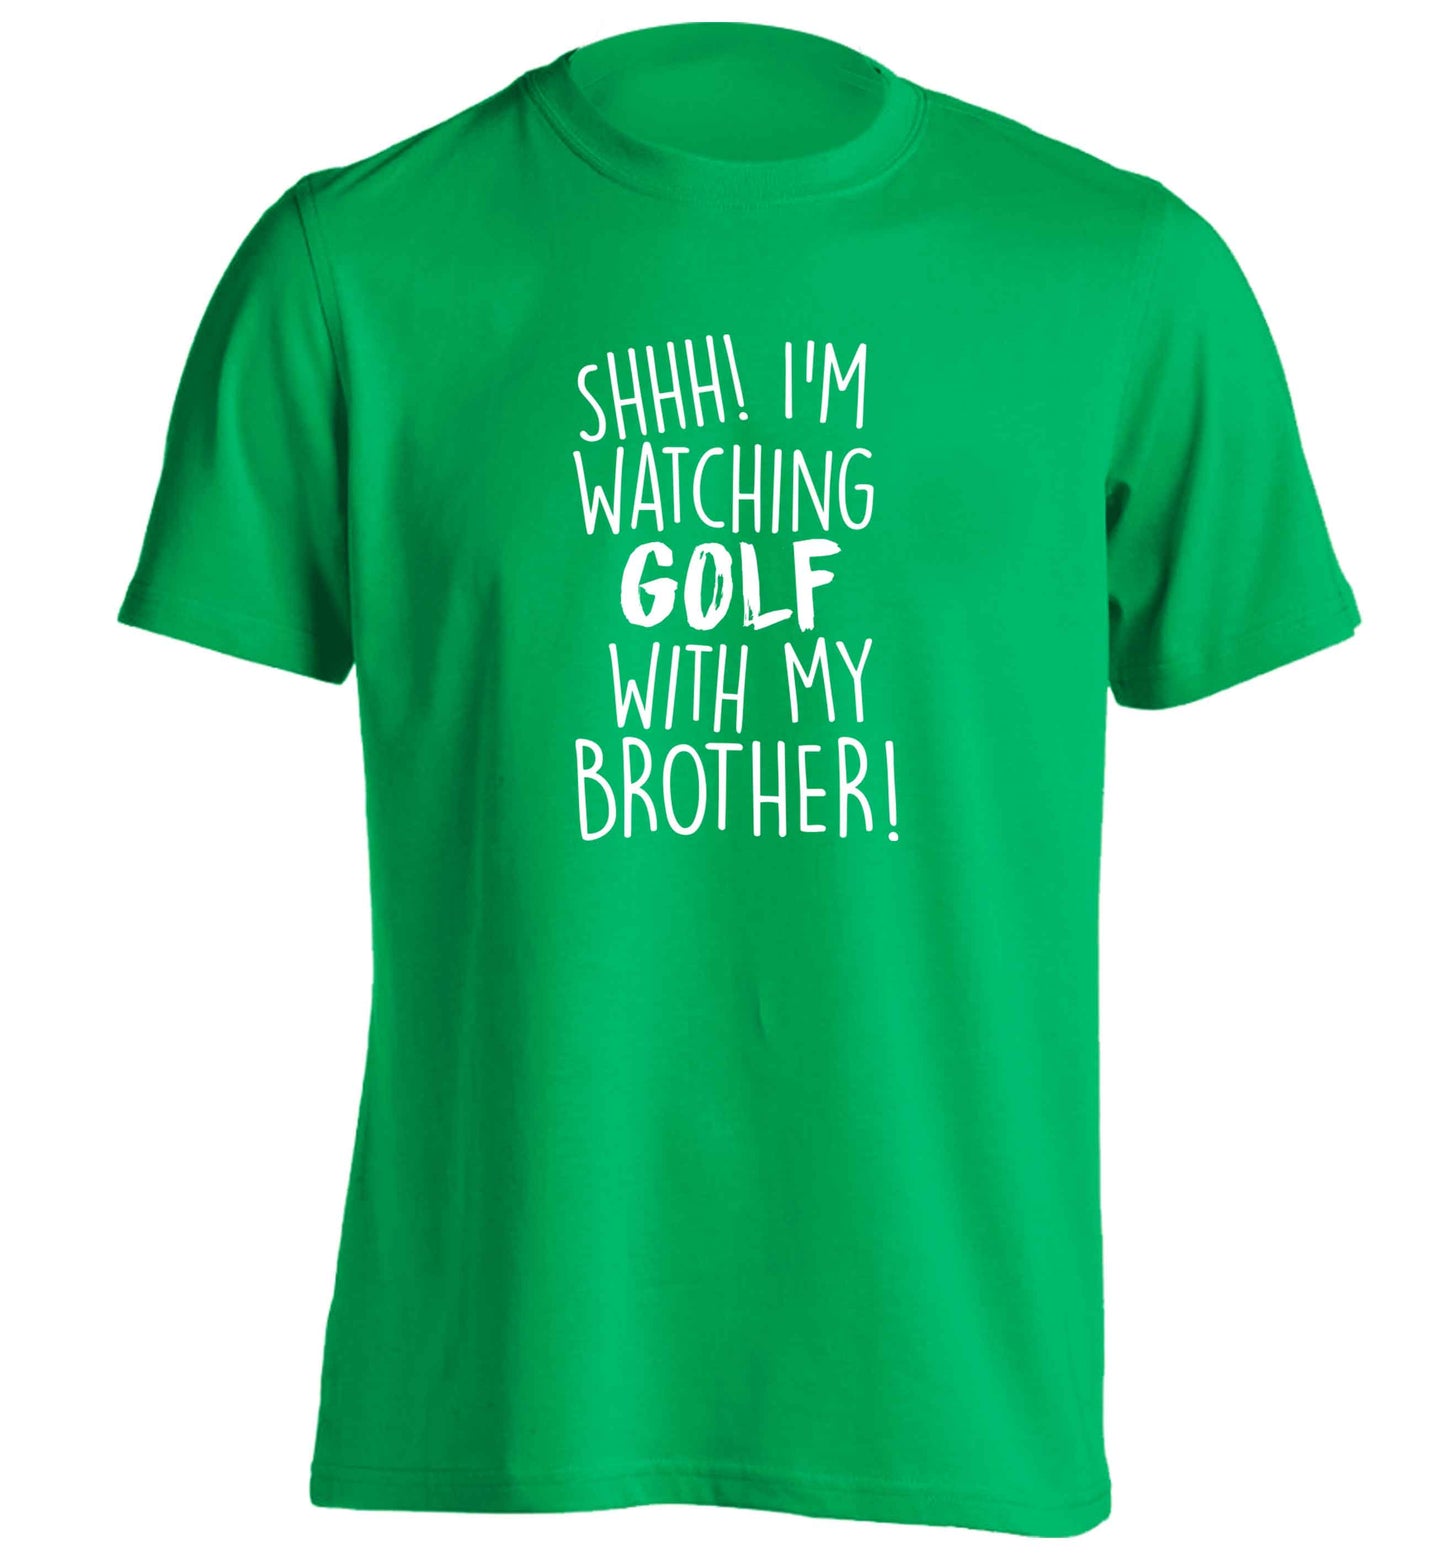 Shh I'm watching golf with my brother adults unisex green Tshirt 2XL